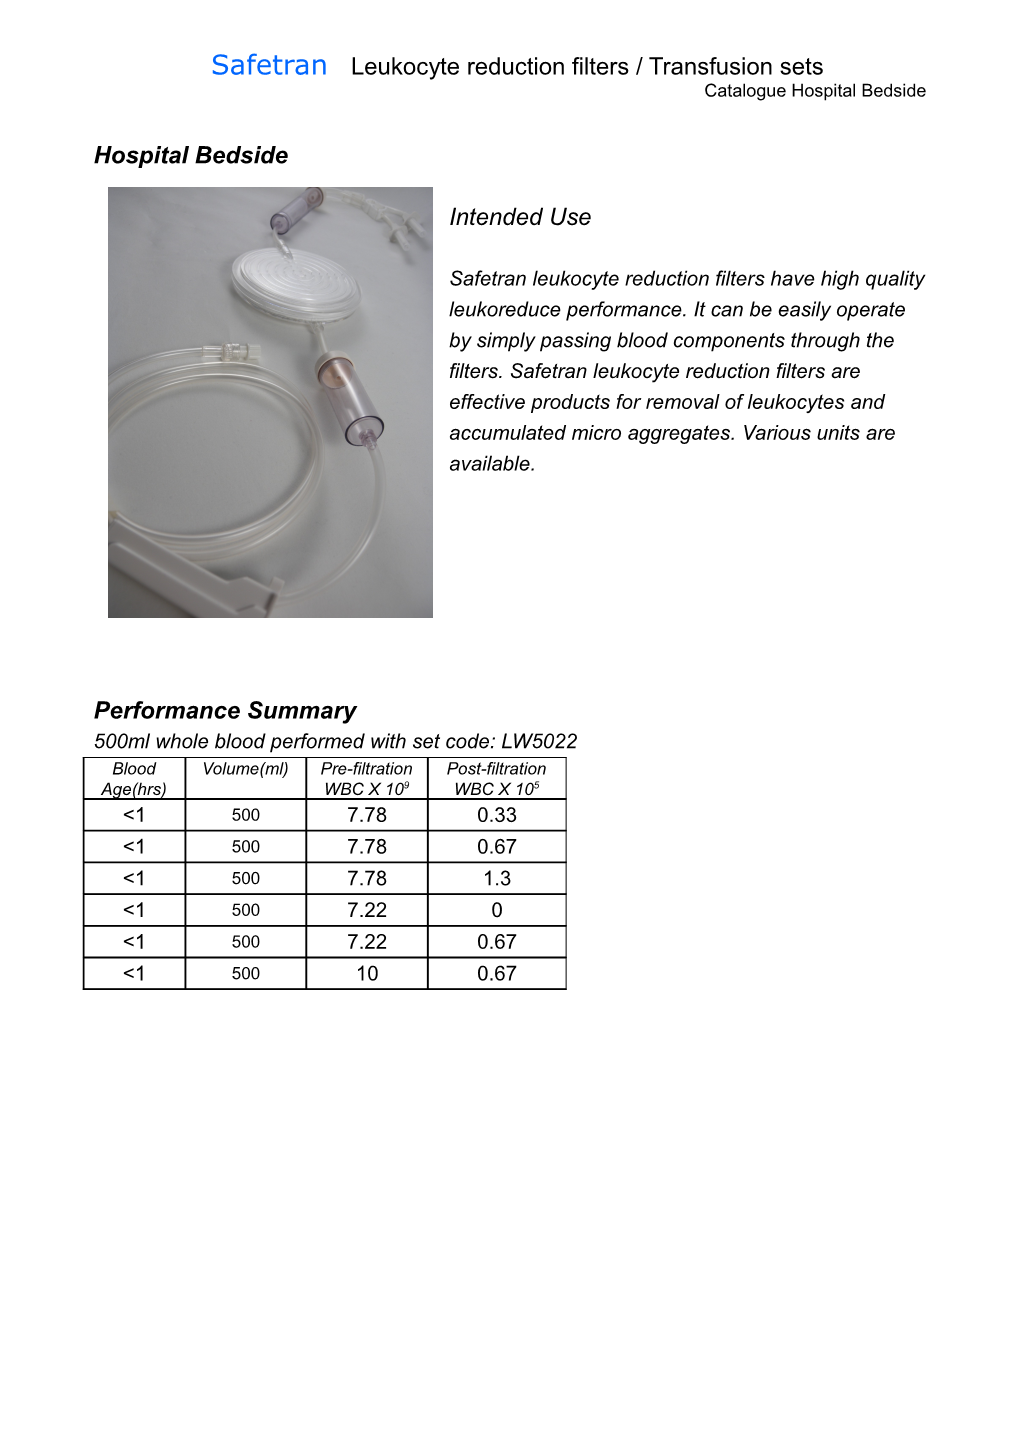 Safetran Leukocyte Reduction Filters / Transfusion Sets